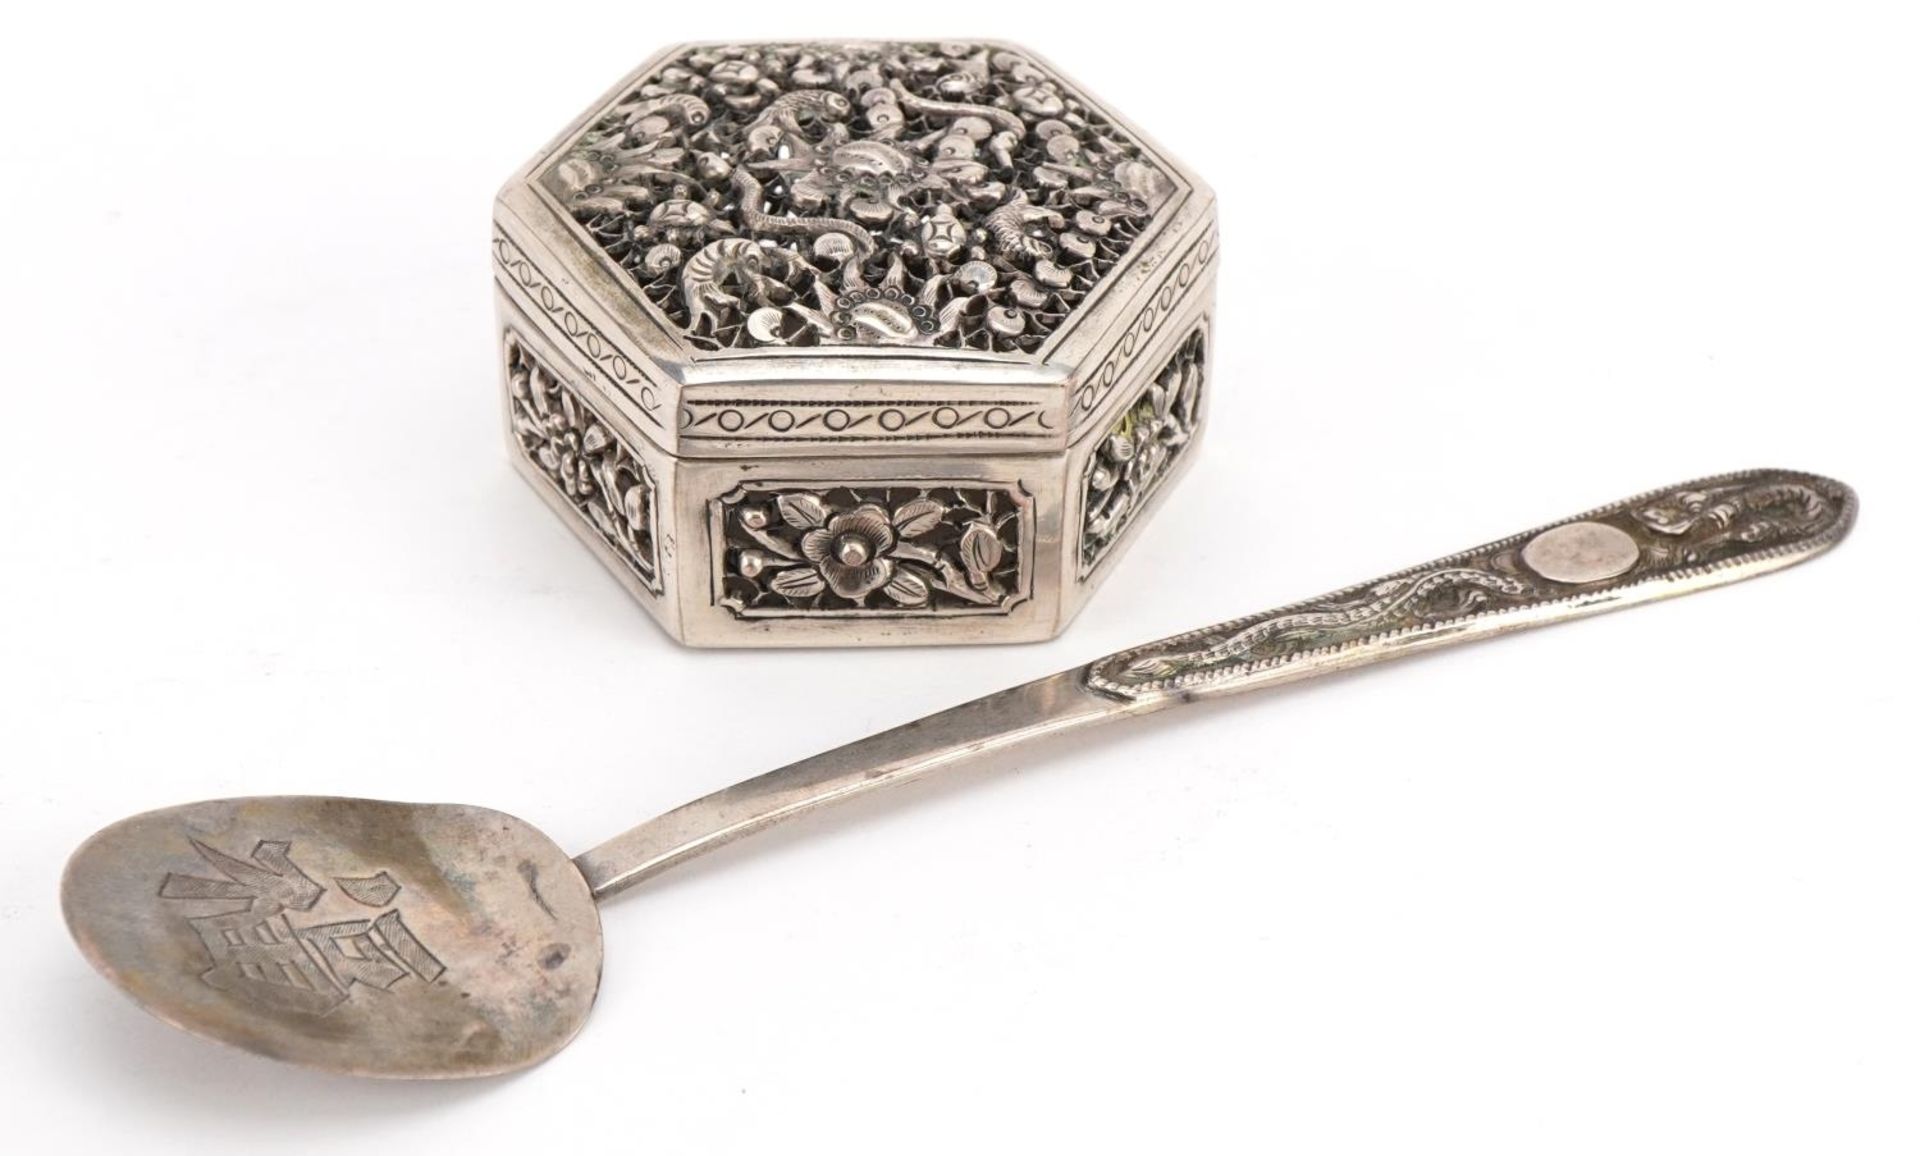 Vietnamese silver pierced box with hinged lid and Chinese spoon with dragon design handle, each wit